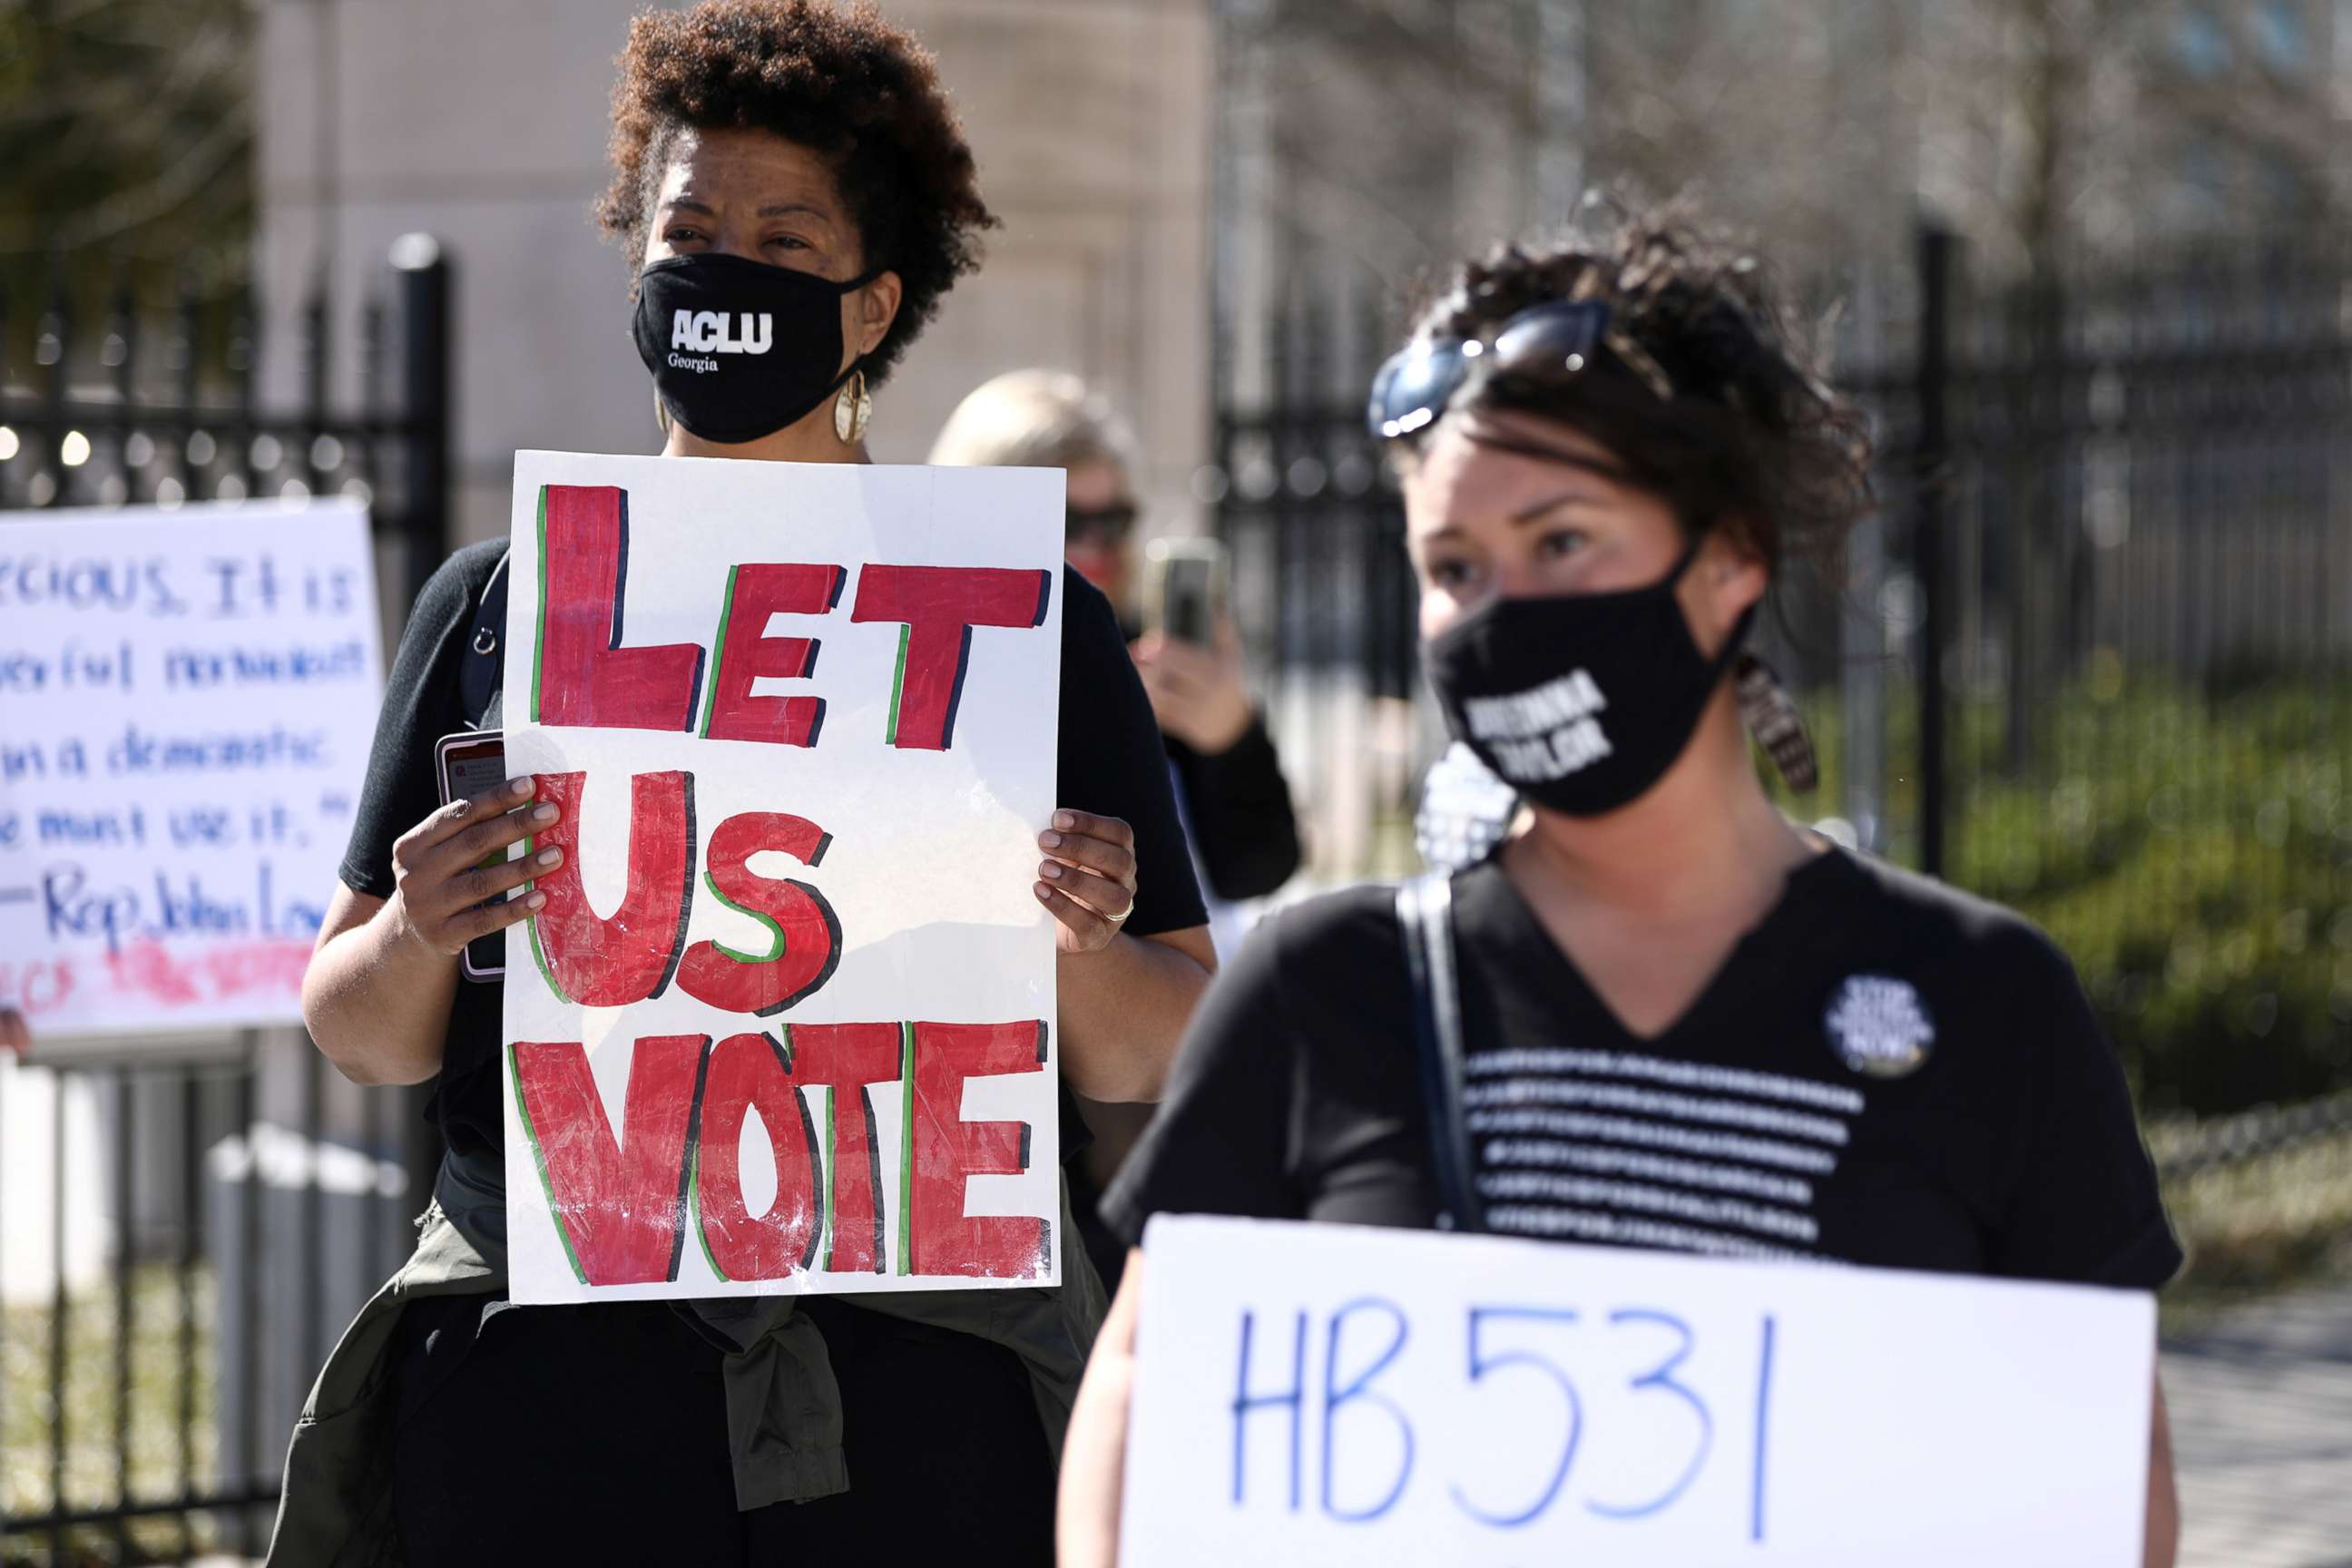 PHOTO: Protesters gather outside of the Georgia State Capitol to protest HB 531, which would place tougher restrictions on voting in Georgia, in Atlanta, Ga., March 4, 2021.